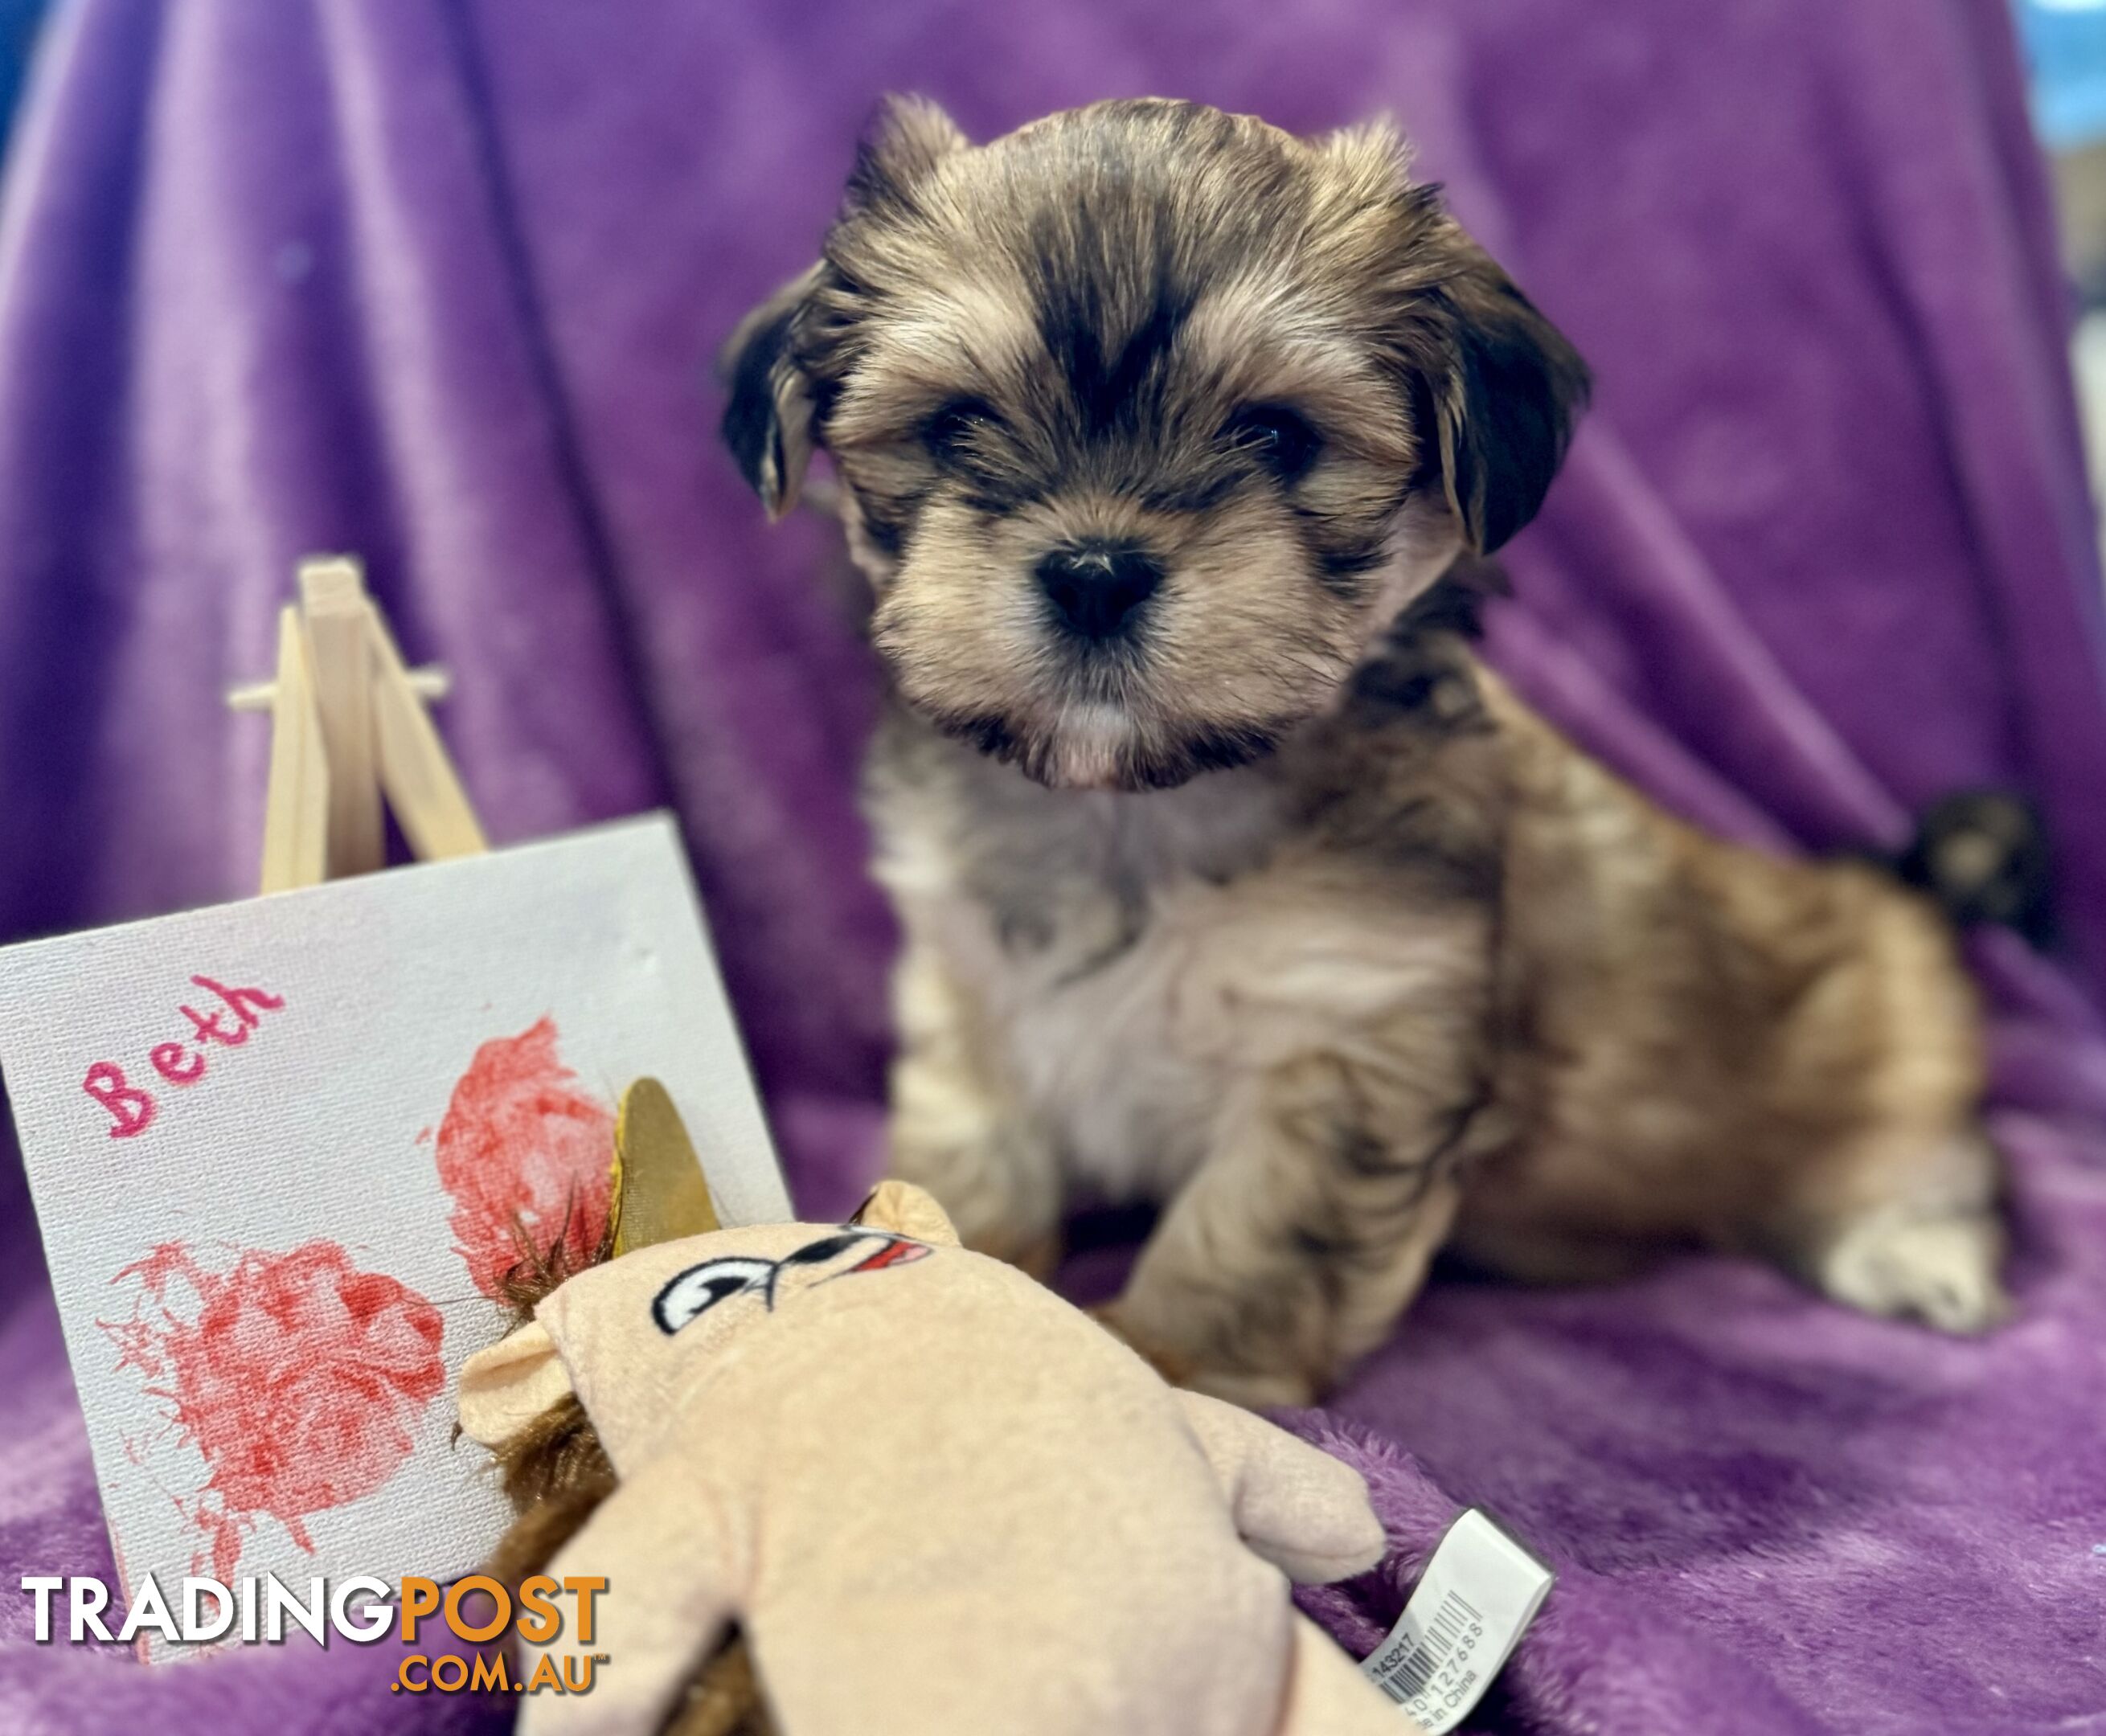 Purebred Lhasa Apso puppies registered breeder, toilet trained!